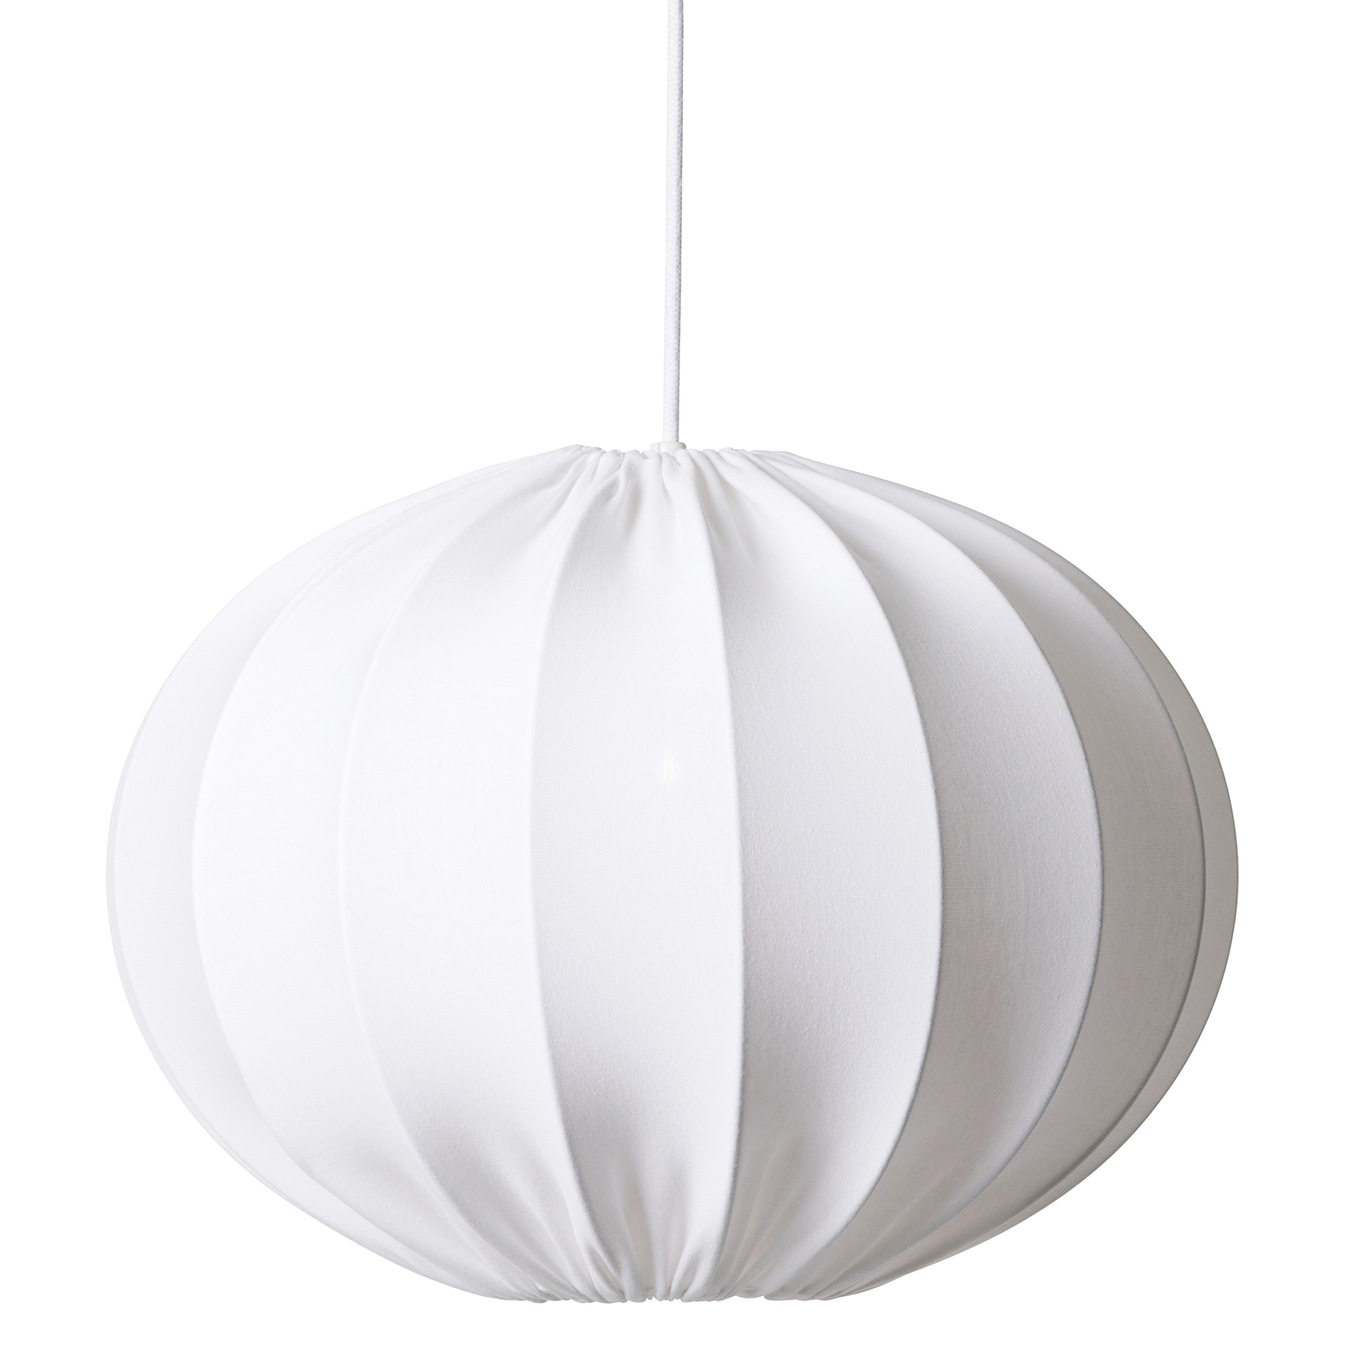 Boll 40 Lampshade Oval, White